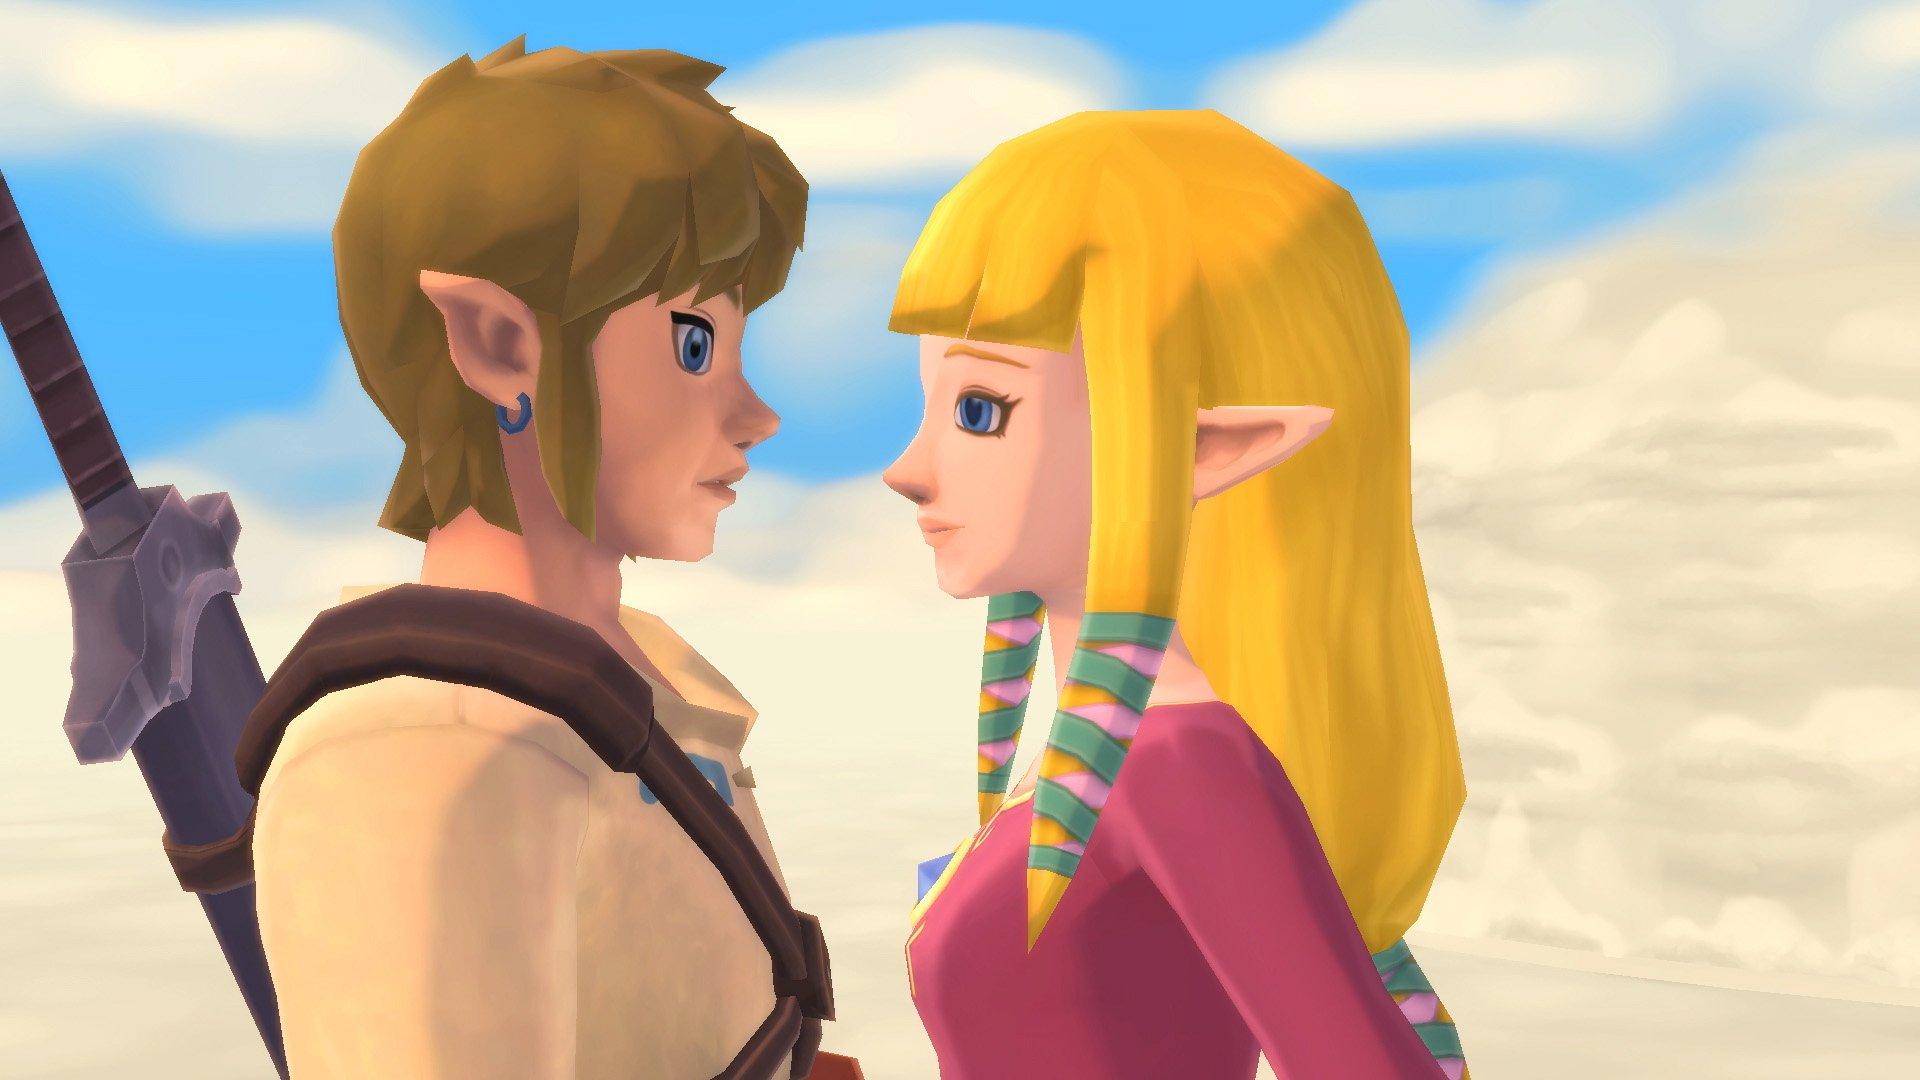 Install and Play The Legend of Zelda Skyward Sword HD For FREE on